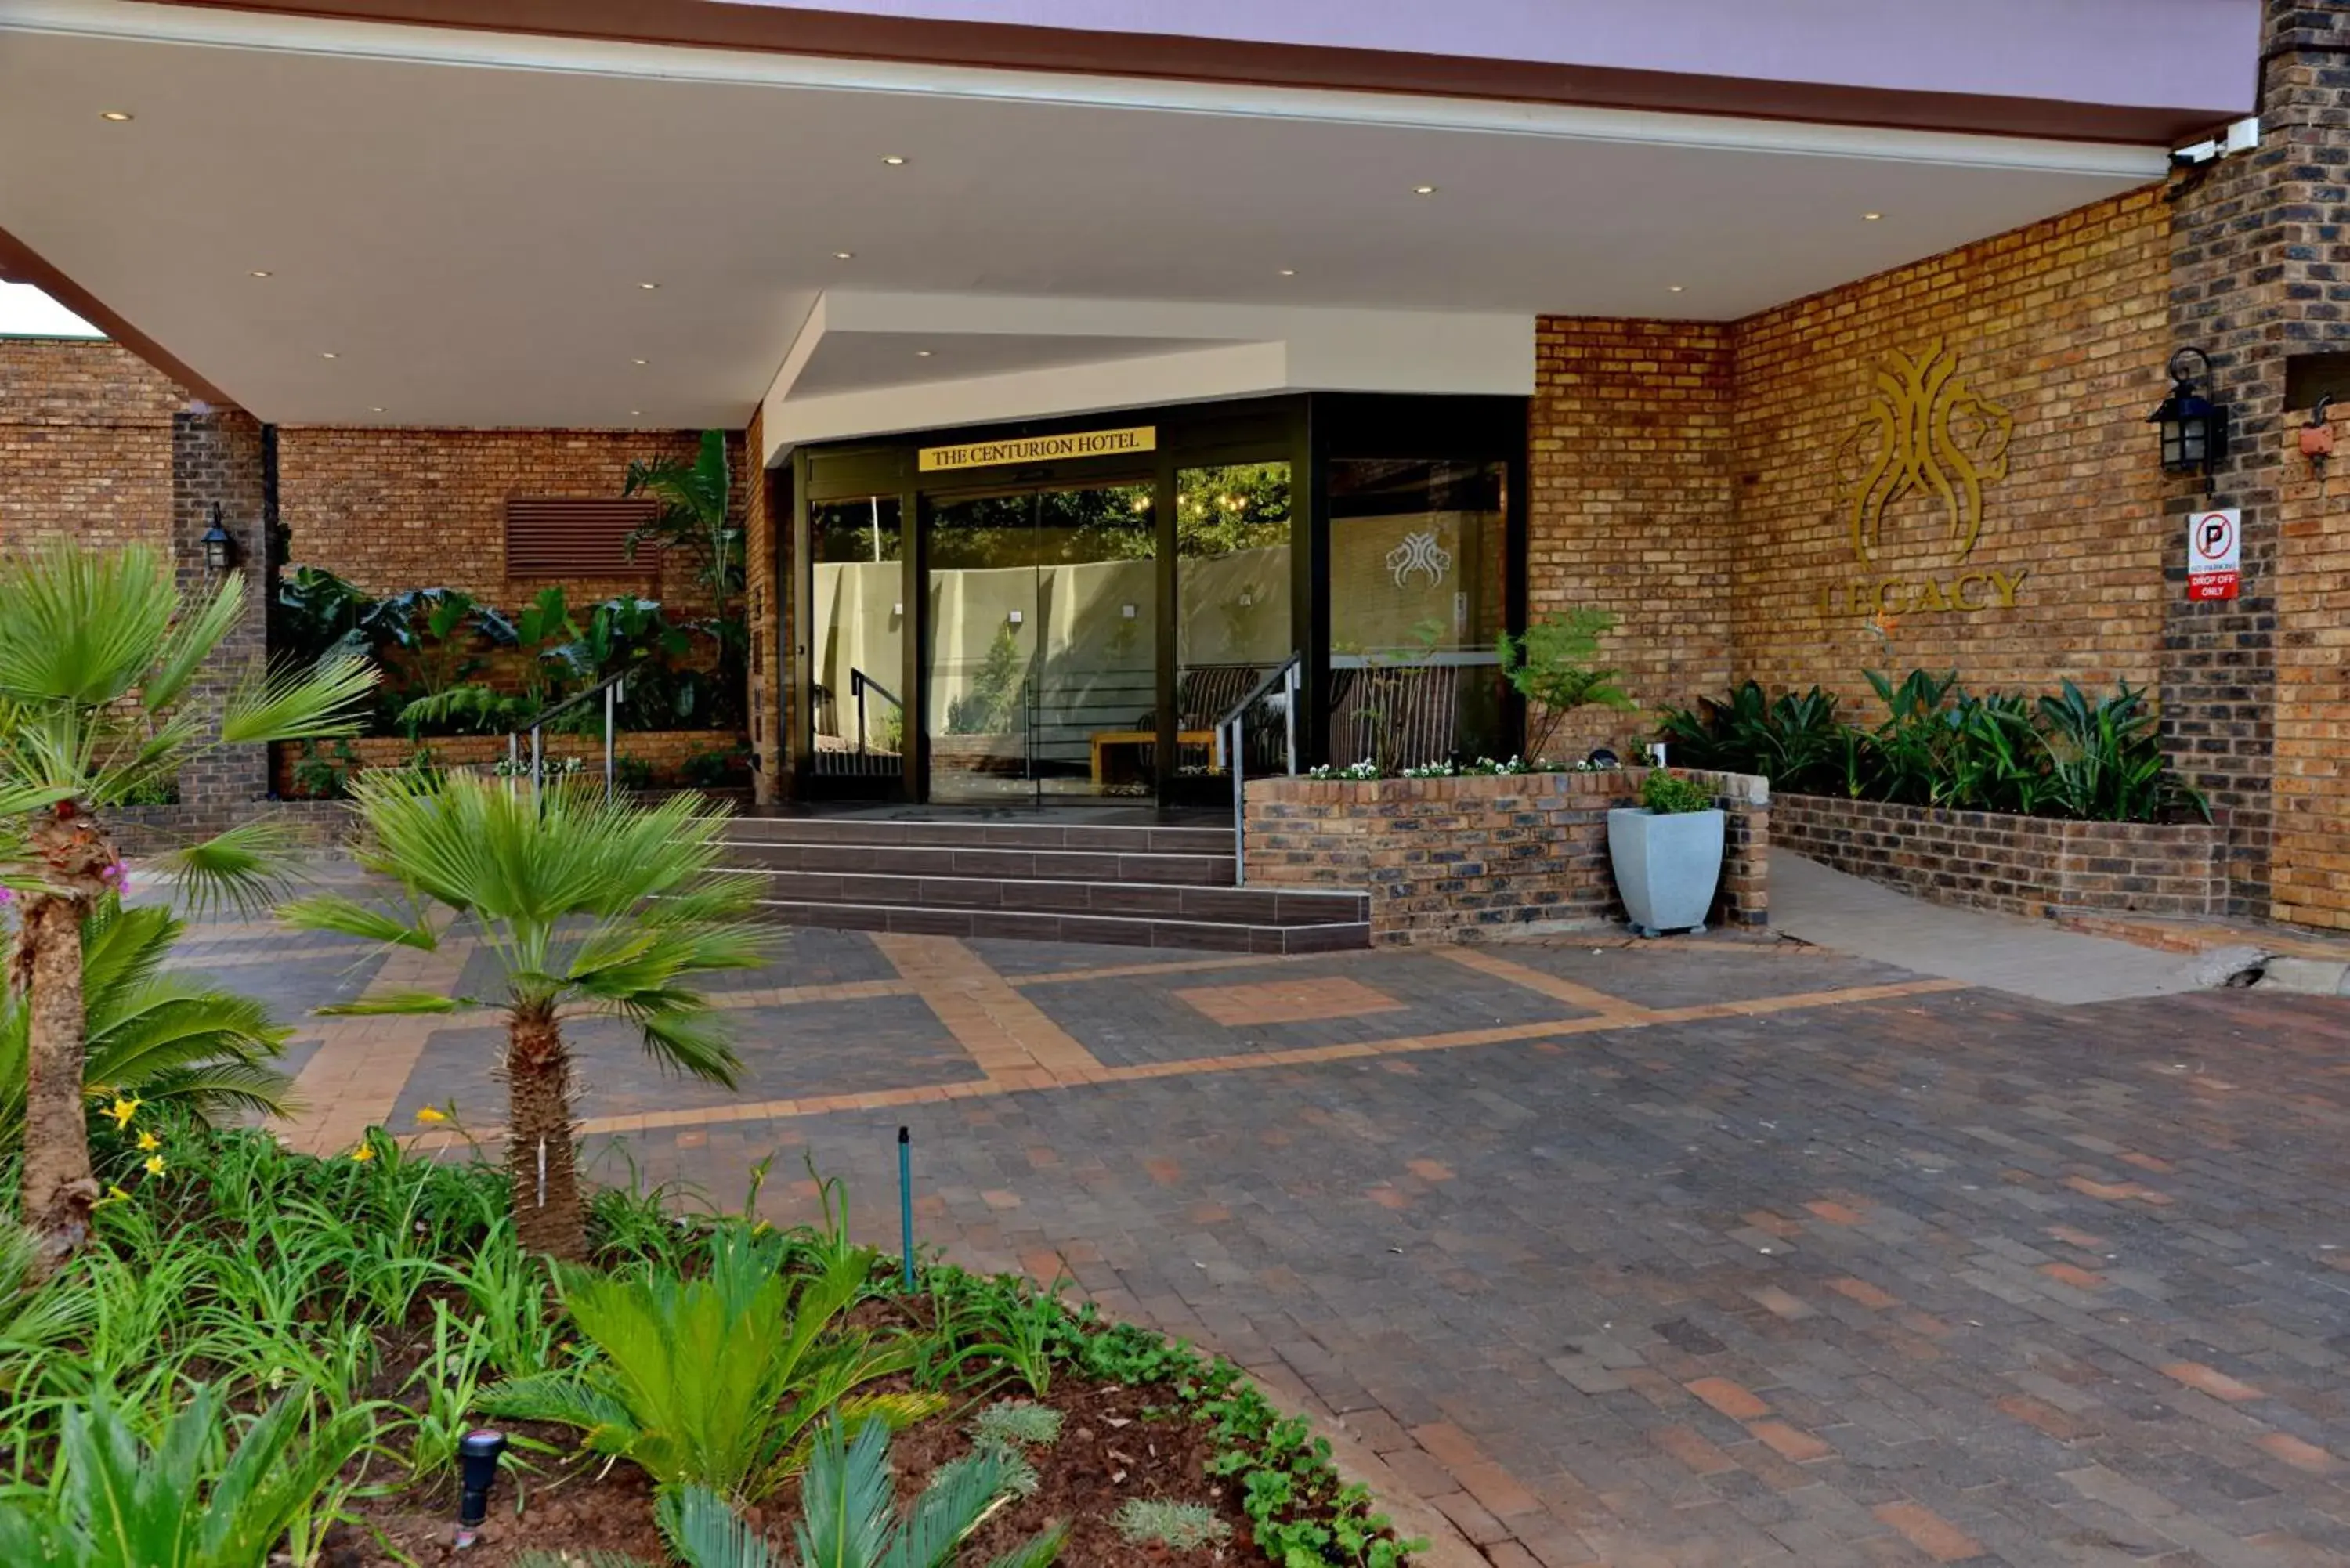 Property building in The Centurion Hotel